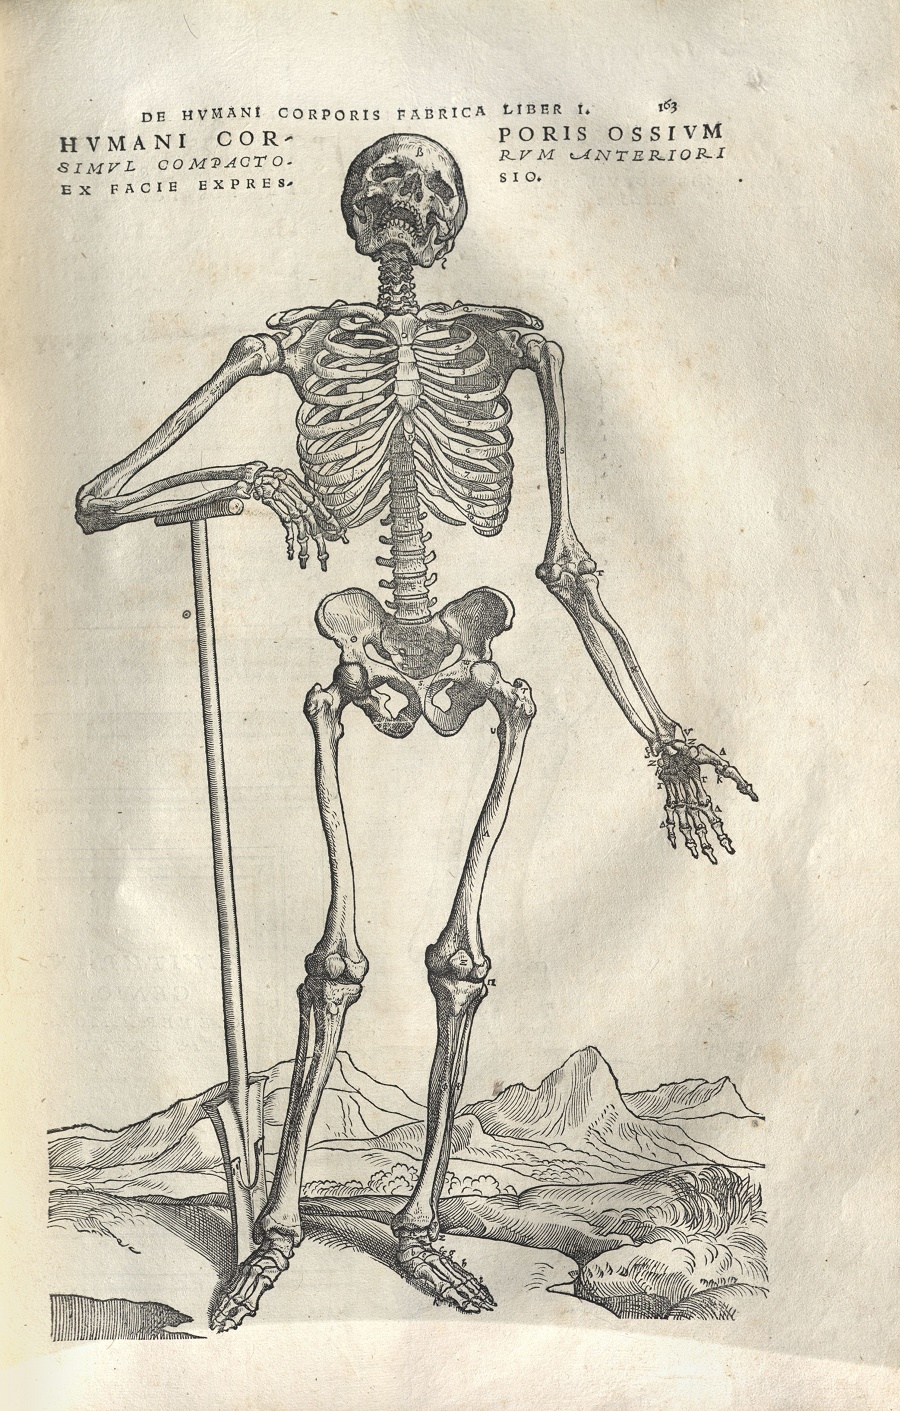 Black-and-white illustration of a skeleton leaning on a shovel. Its skull is tilted back and its mouth is open. There is a mountainous landscape behind it.